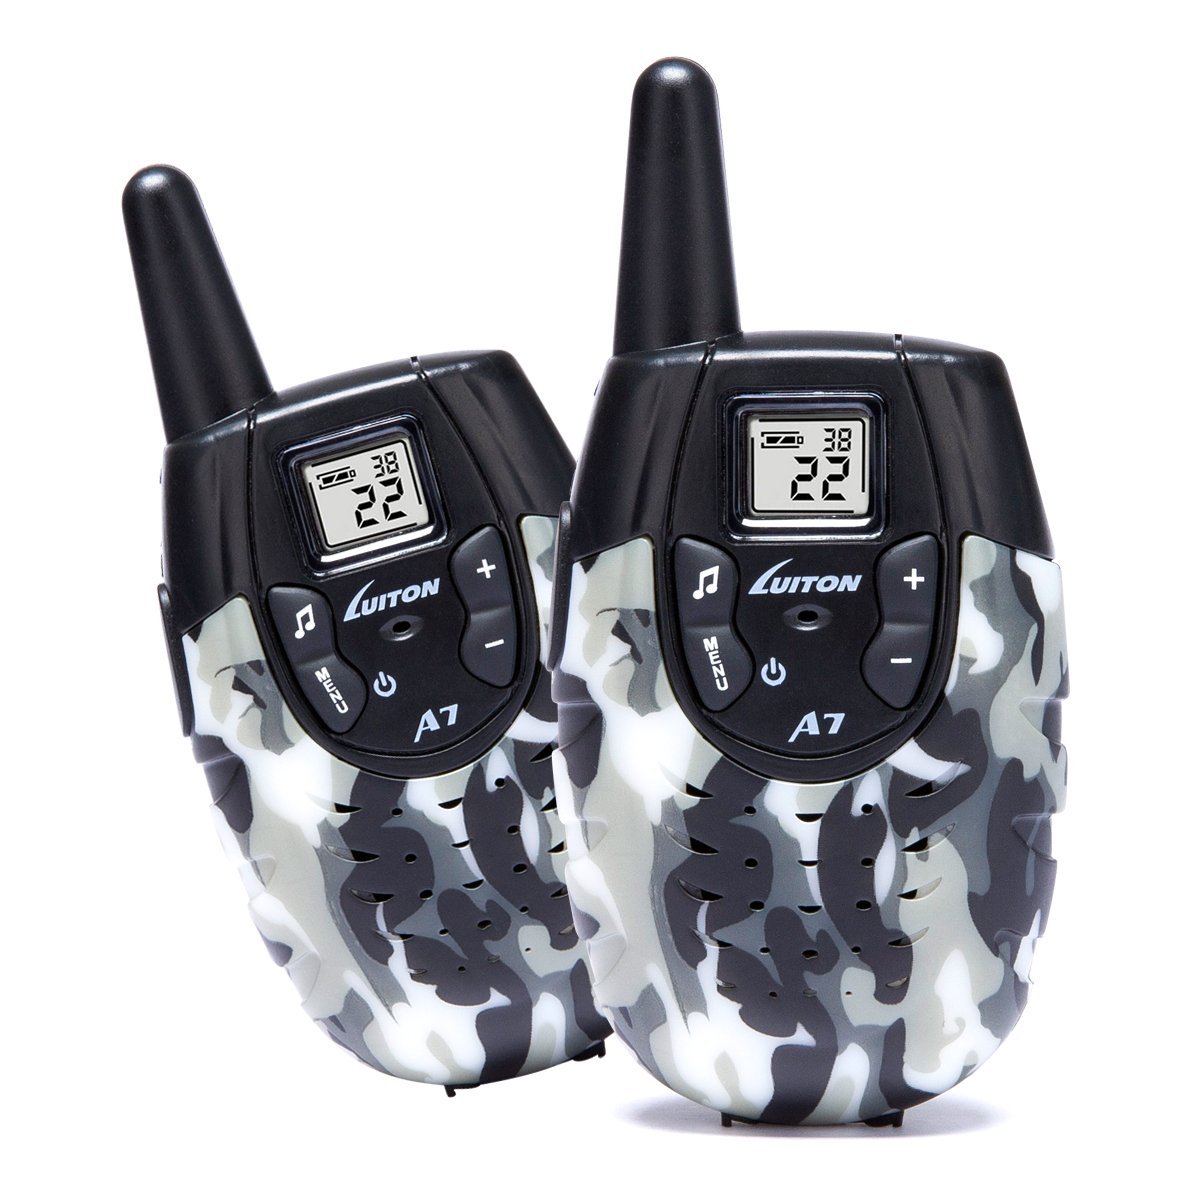 

LUITON Walkie Talkies For Kids Toys Boys Girls With Rechargeable Battery (1 Pair)